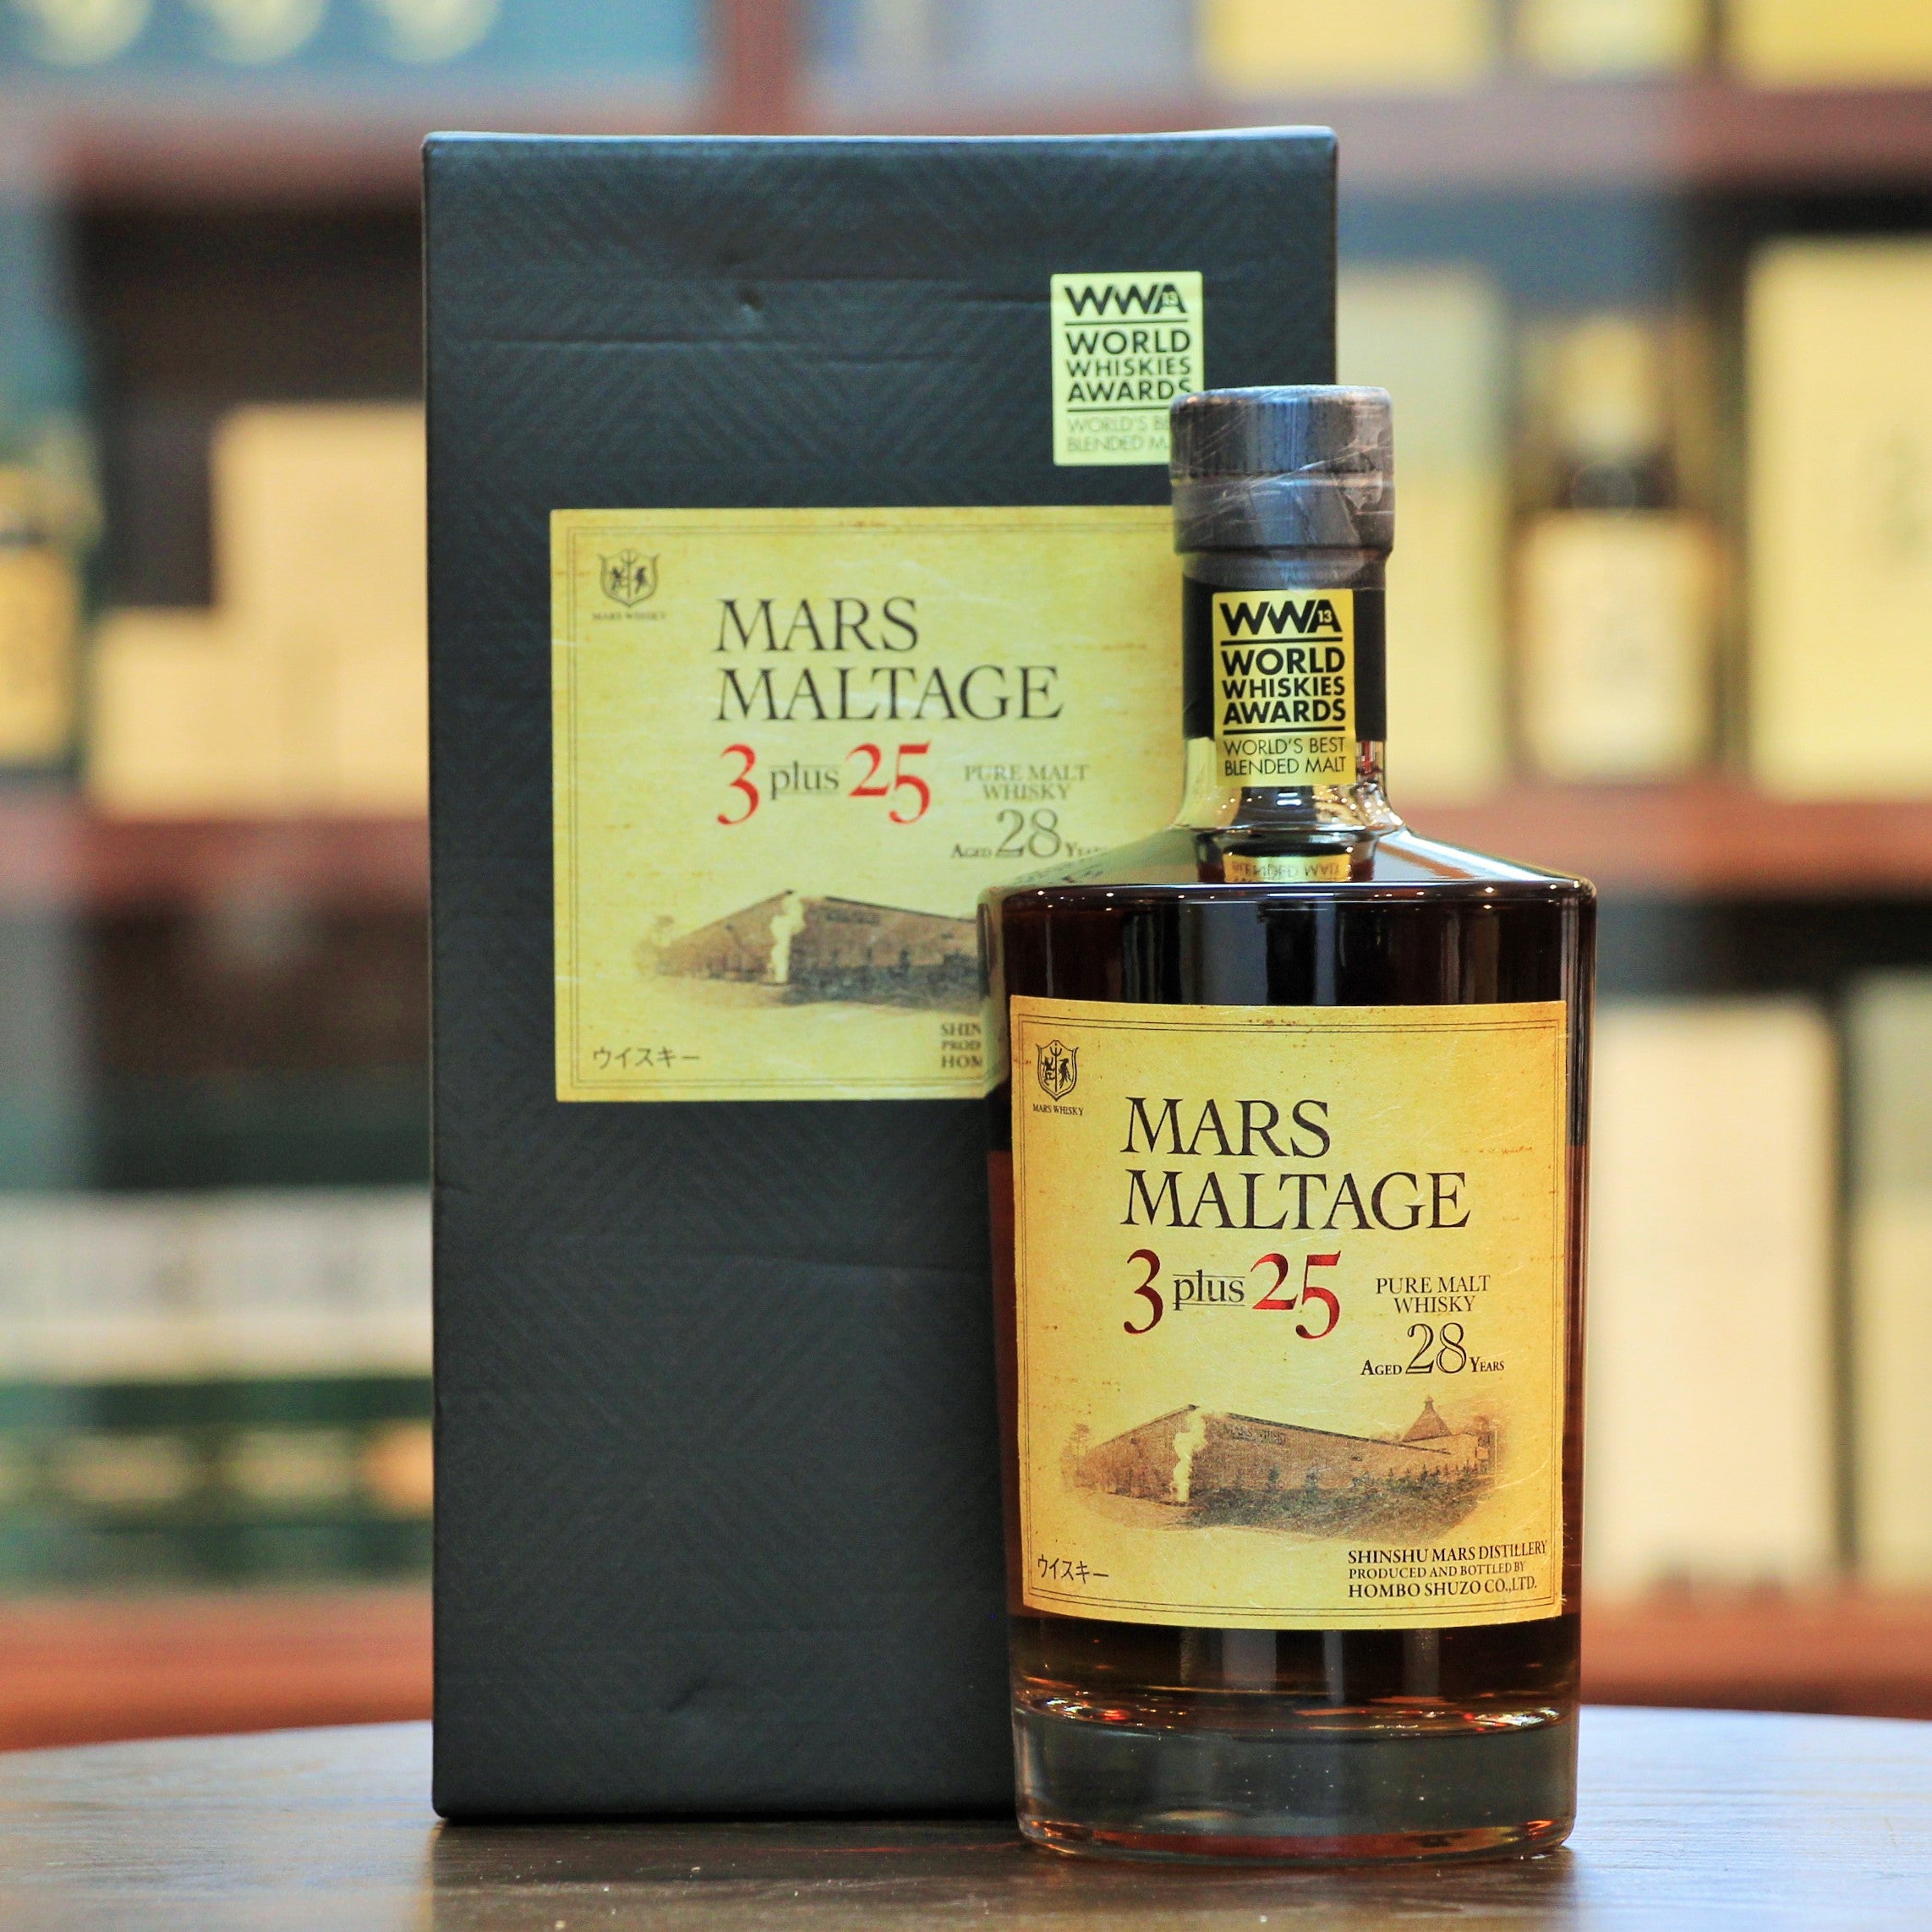 Mars Maltage 3 Plus 25 Pure Malt Whisky 28 Years Old, World Whiskies Awards 2013, World’s Best Blended Malt Whisky. One of 3800 bottles. A marriage of 3 year whiskies distilled at Kagoshima distillery (closed in 1984)  and Yamanashi (closed in 1969) and then matured at the current site in Nagano (Mars Shinshu) for further 25 years.